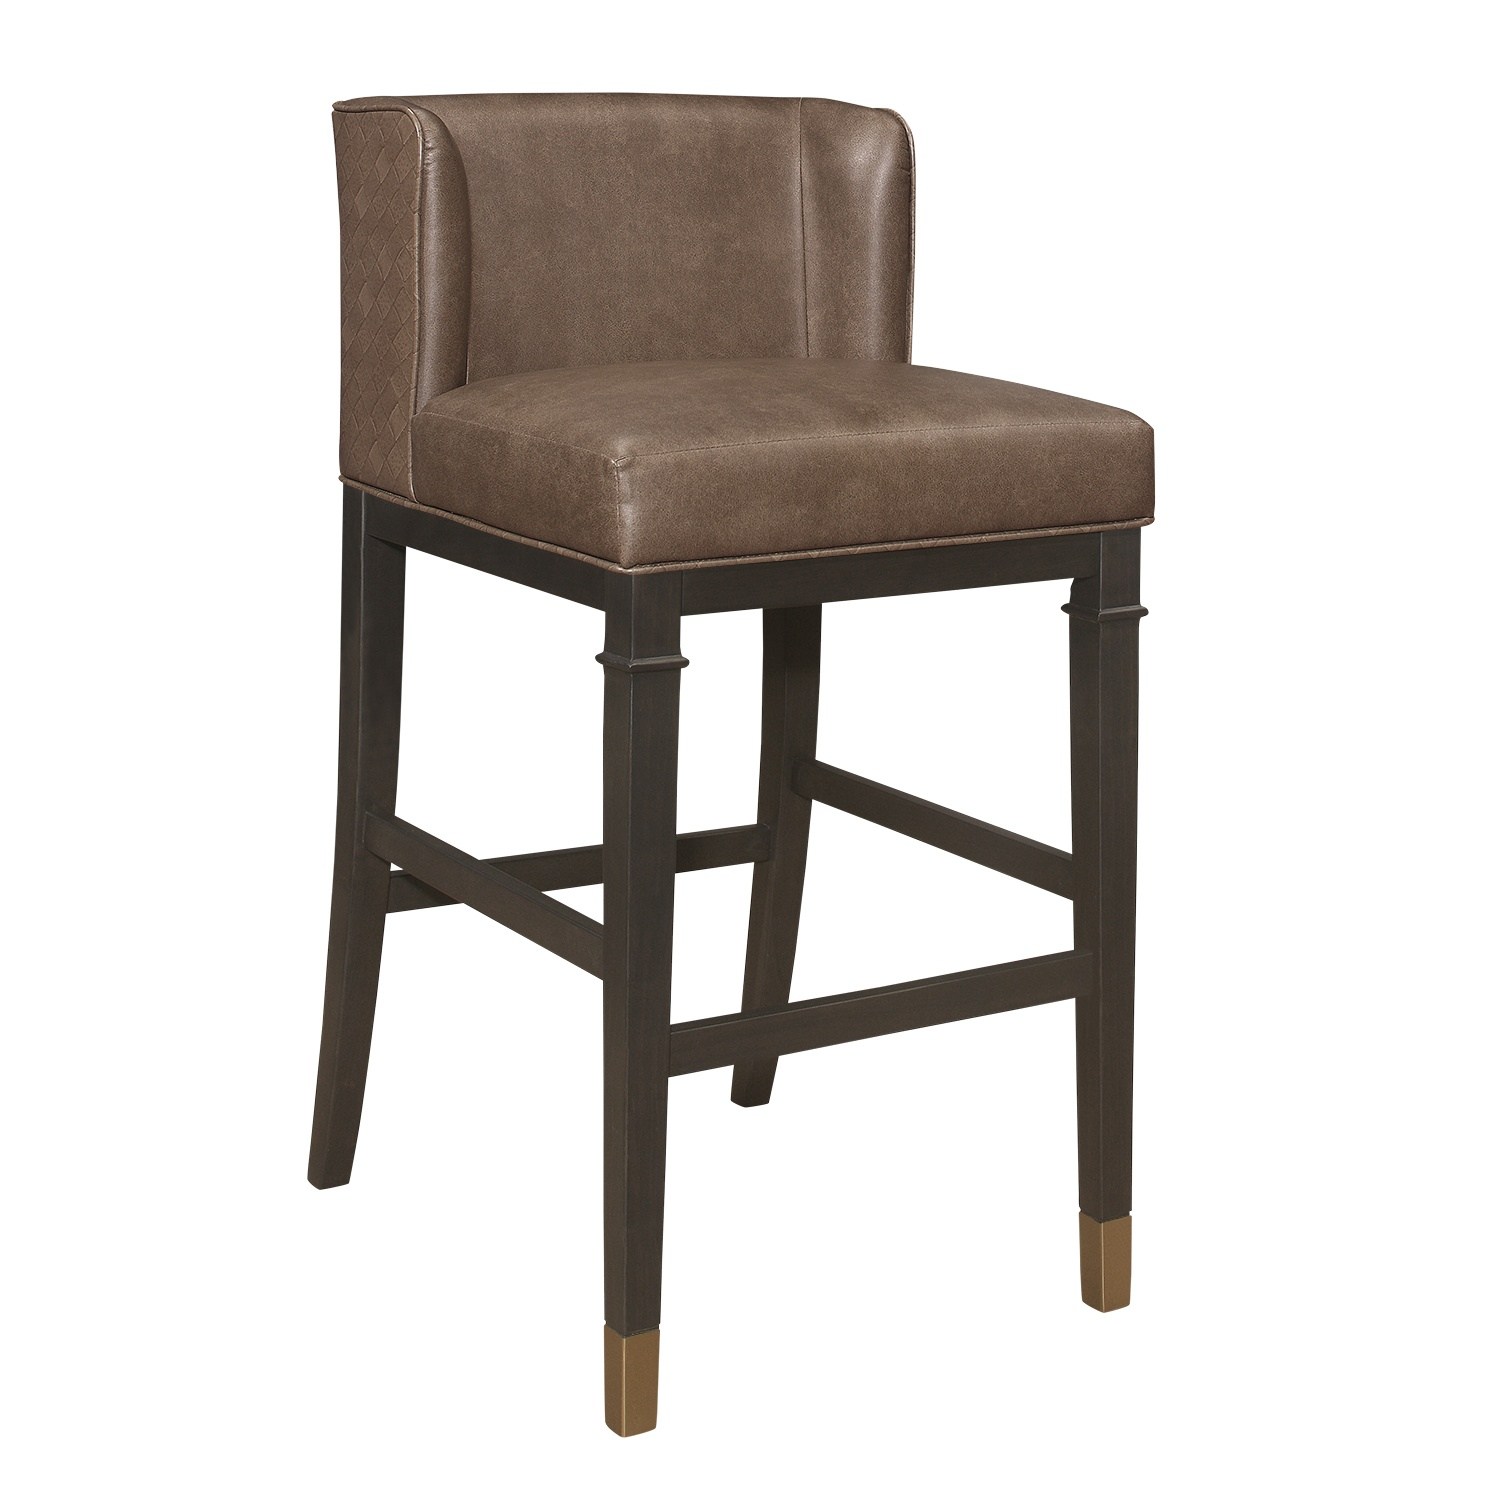 Hillsdale Hotchner Wing Back Upholstered Wood Bar Height Stool - Cafe Faux Leather